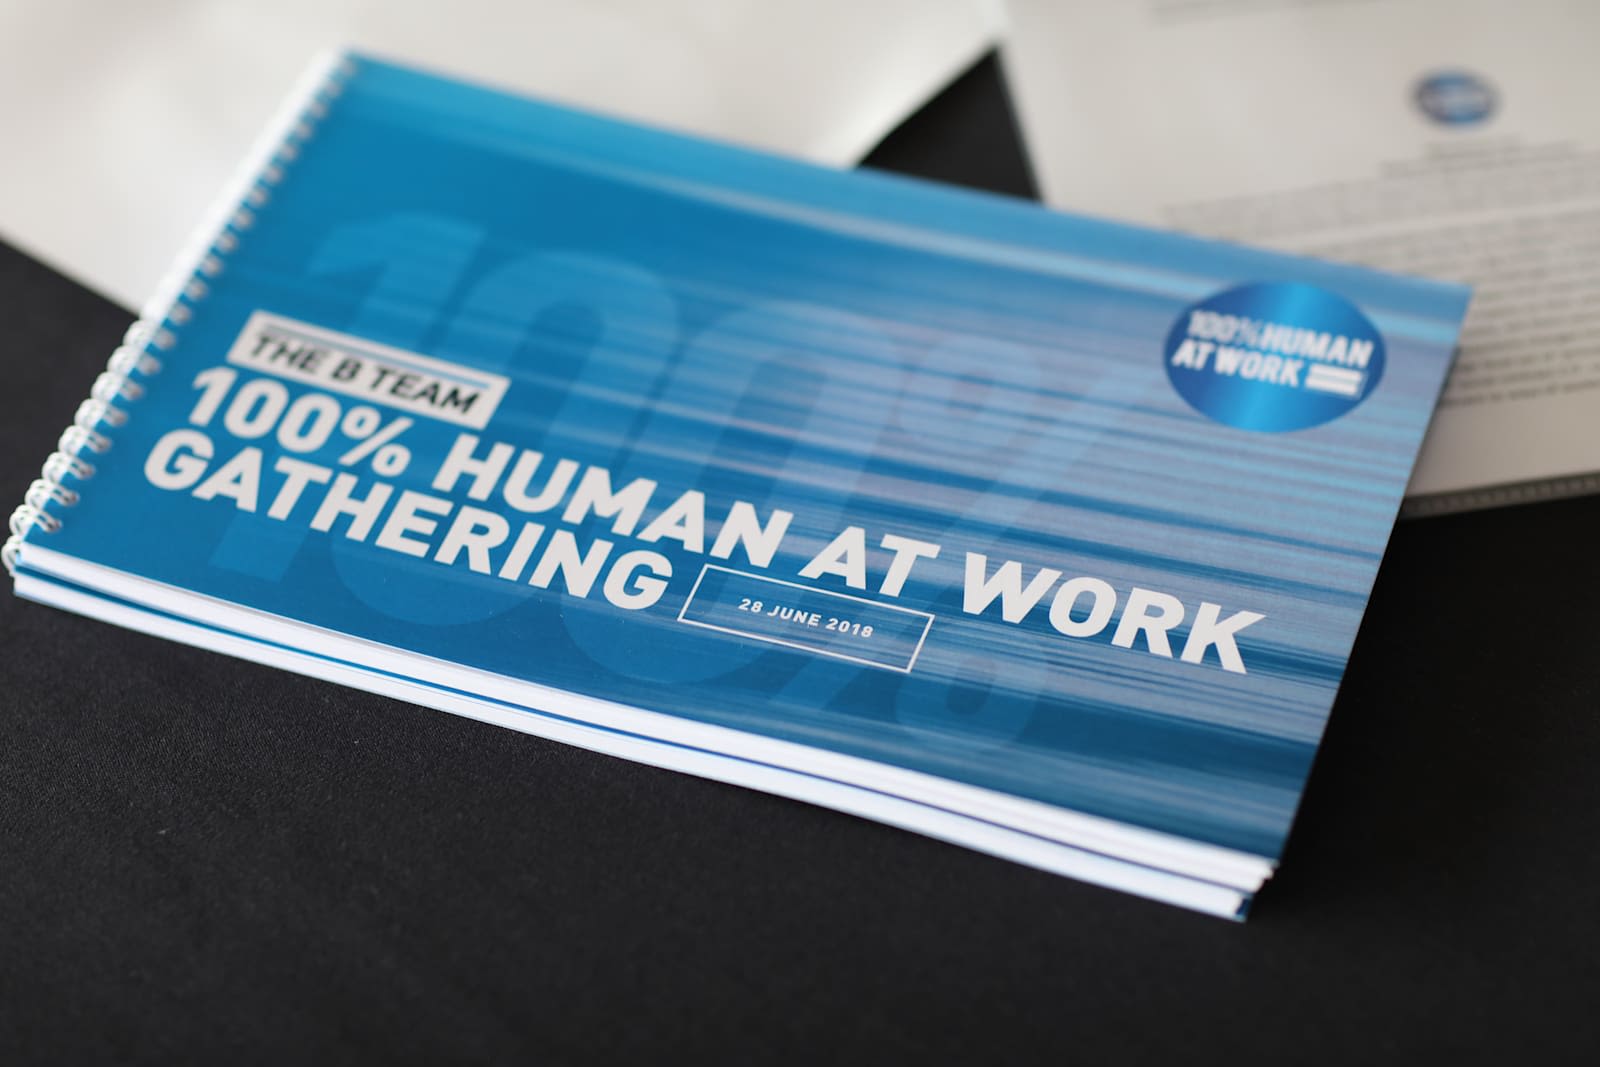 A small, blue booklet from The B Team about their 100% Human at Work initiative. In white on the front cover it says '100% Human at Work Gathering'